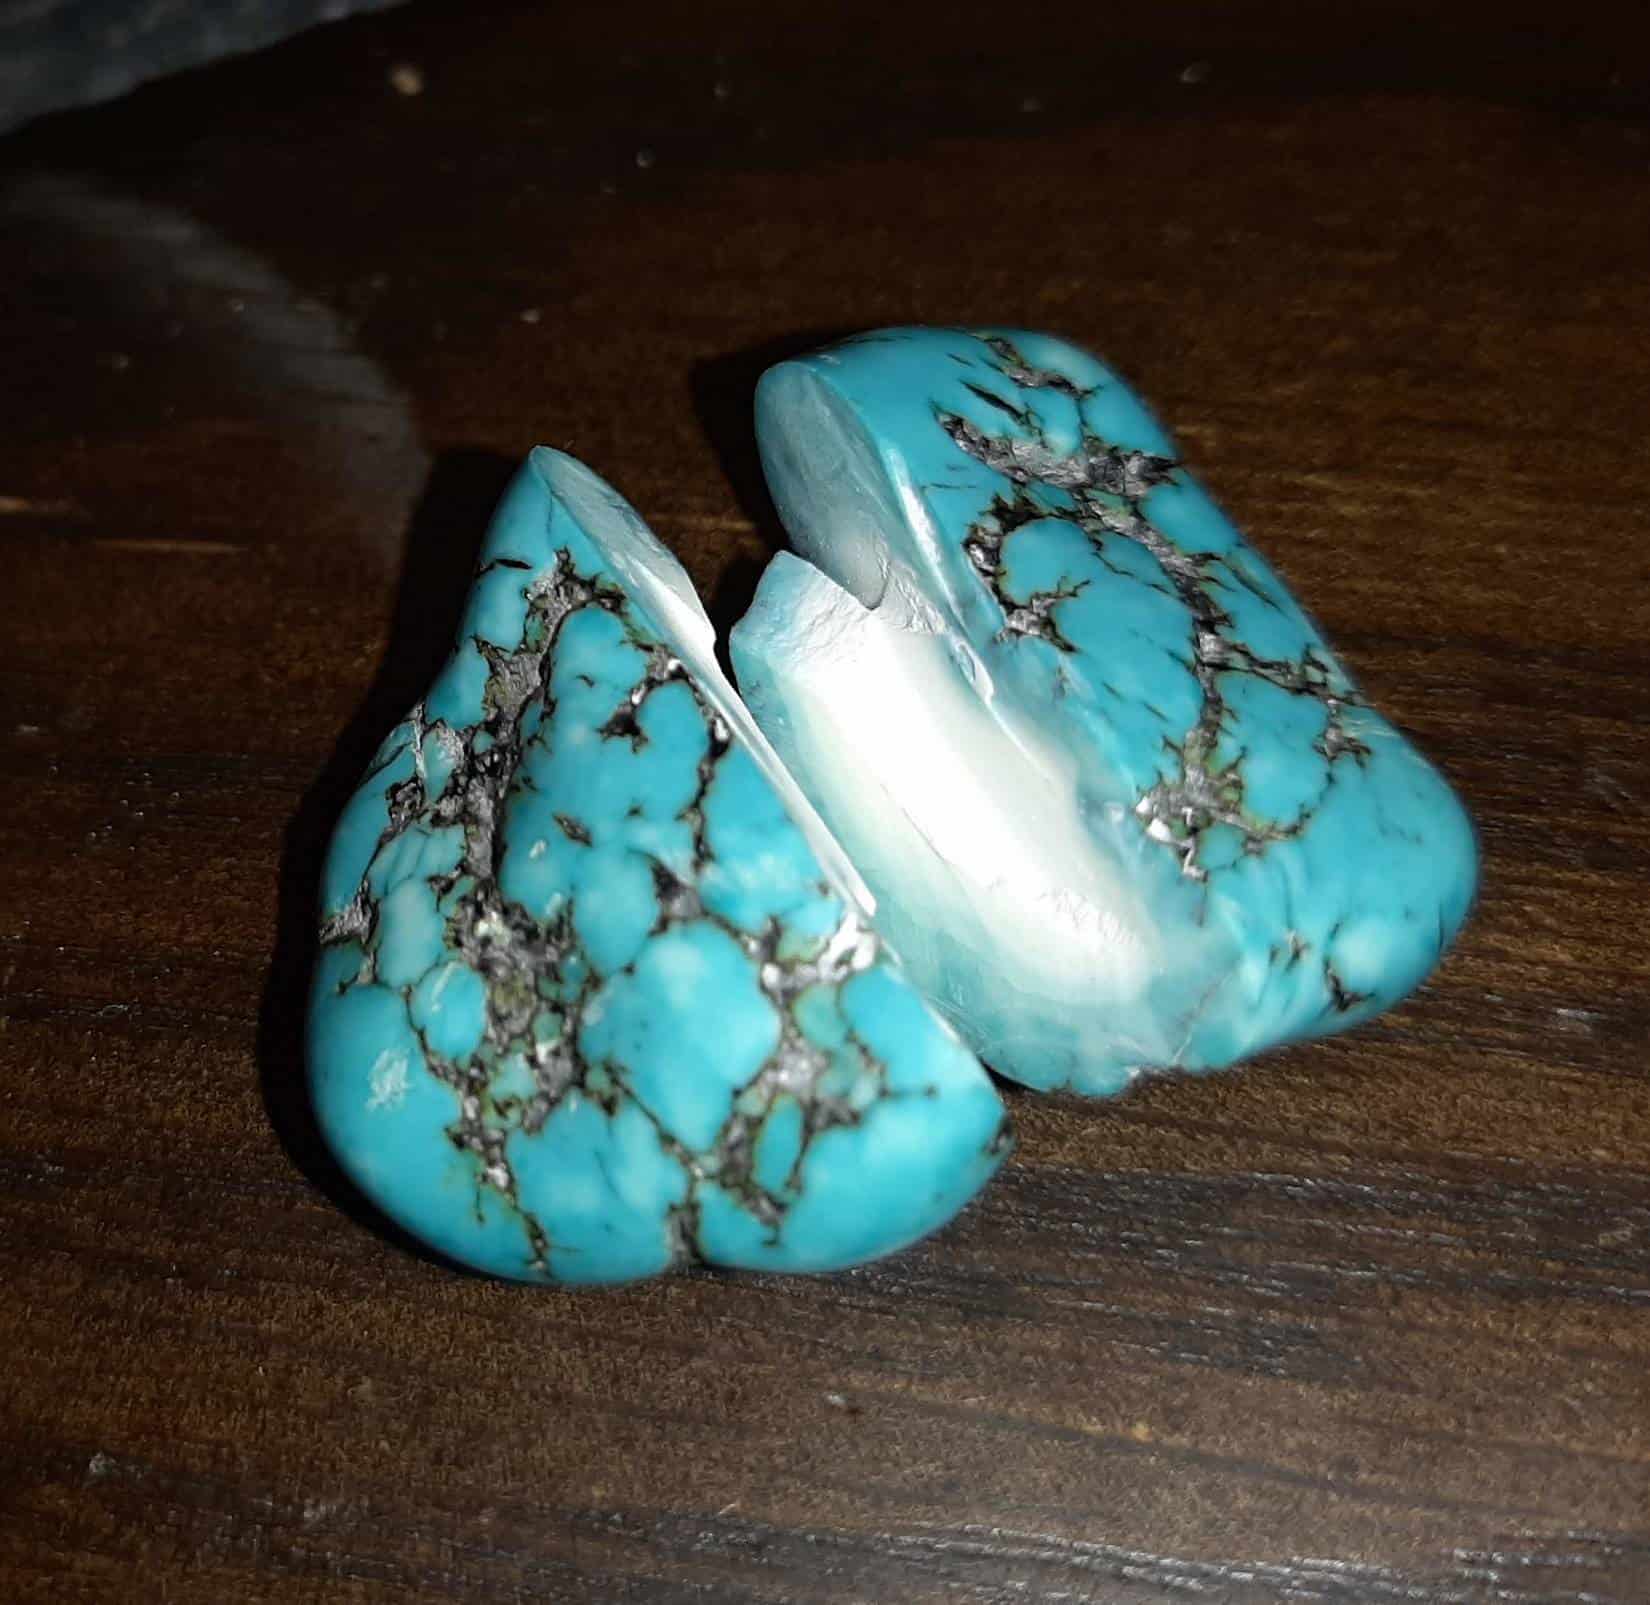 Mineral scams, fakes, and tricks: Identifying and Testing Fake Turquoise